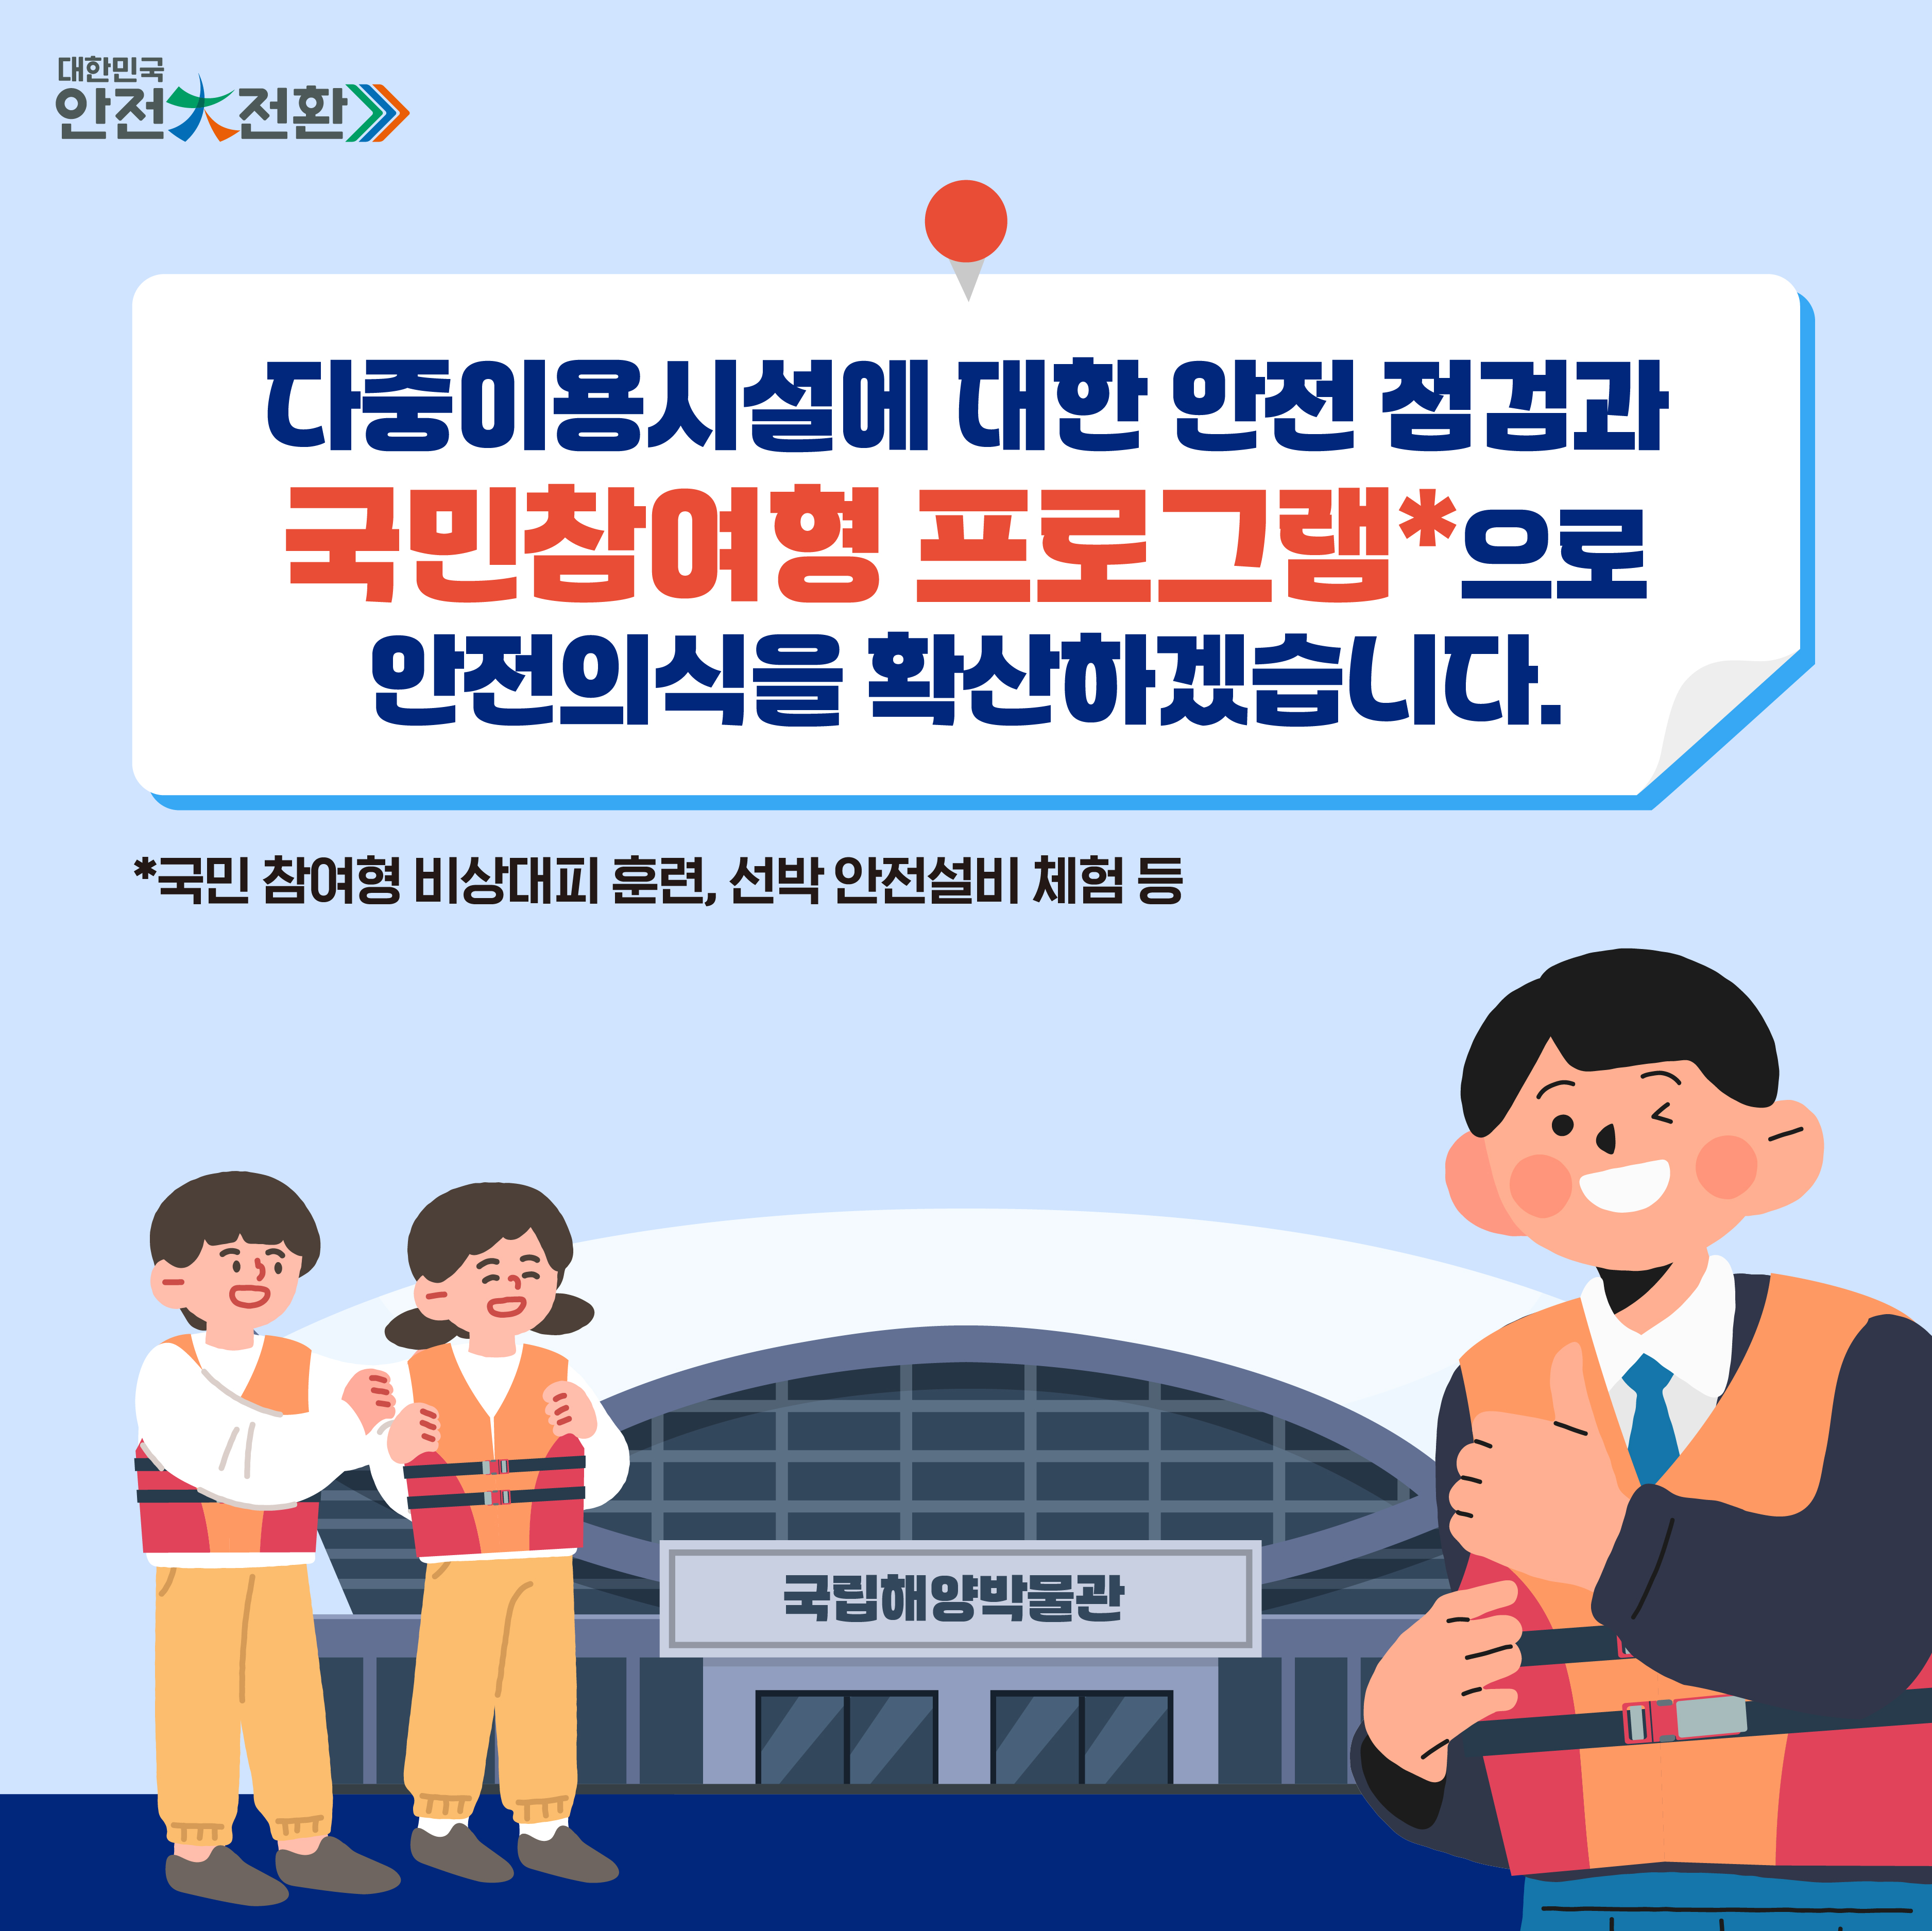 https://www.komsa.or.kr/kor/;jsessionid=BF4BE59084809B5E04A8196A2A234CFE